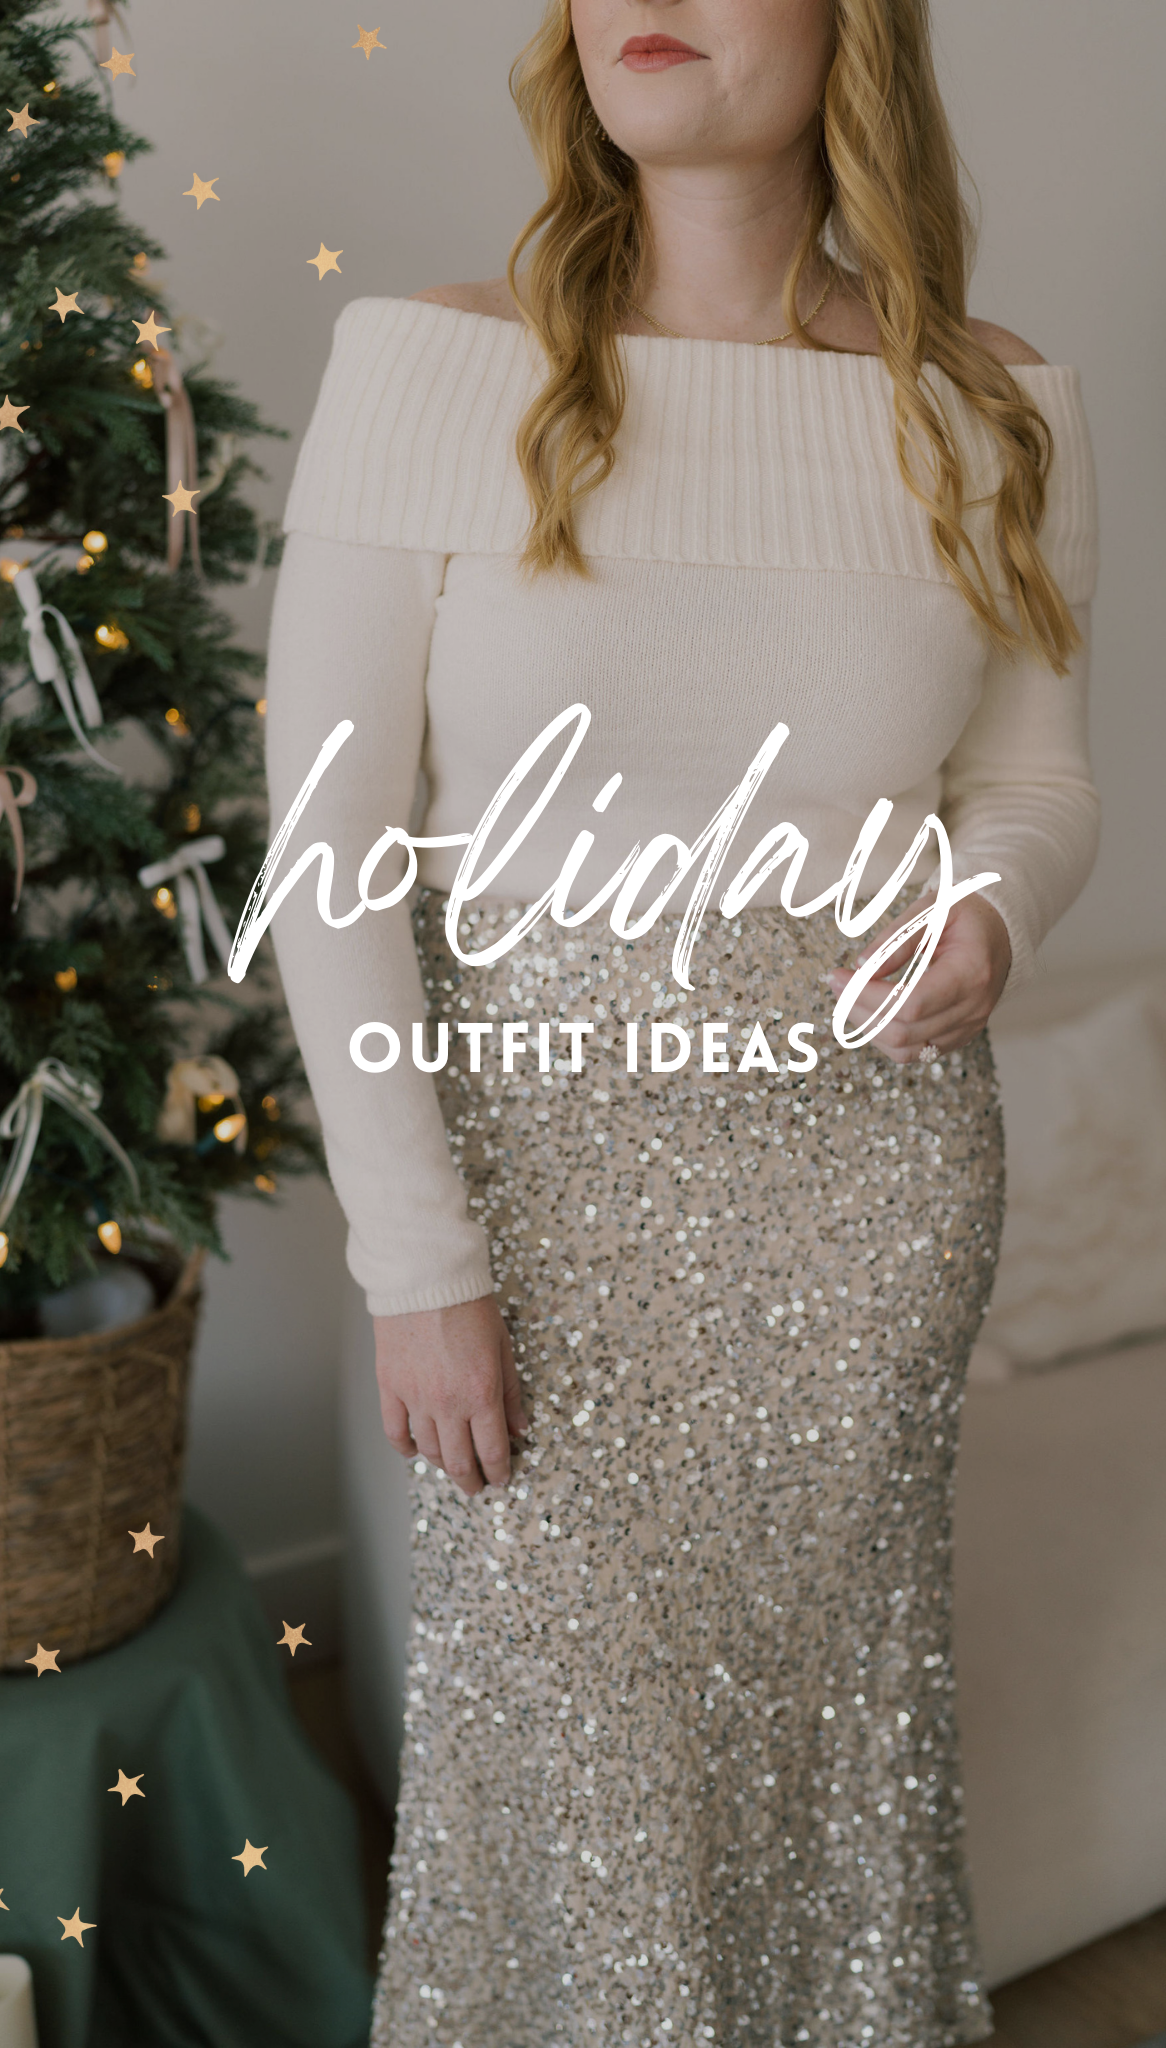 Holiday outfit ideas  Christmas outfits women, Holiday outfits